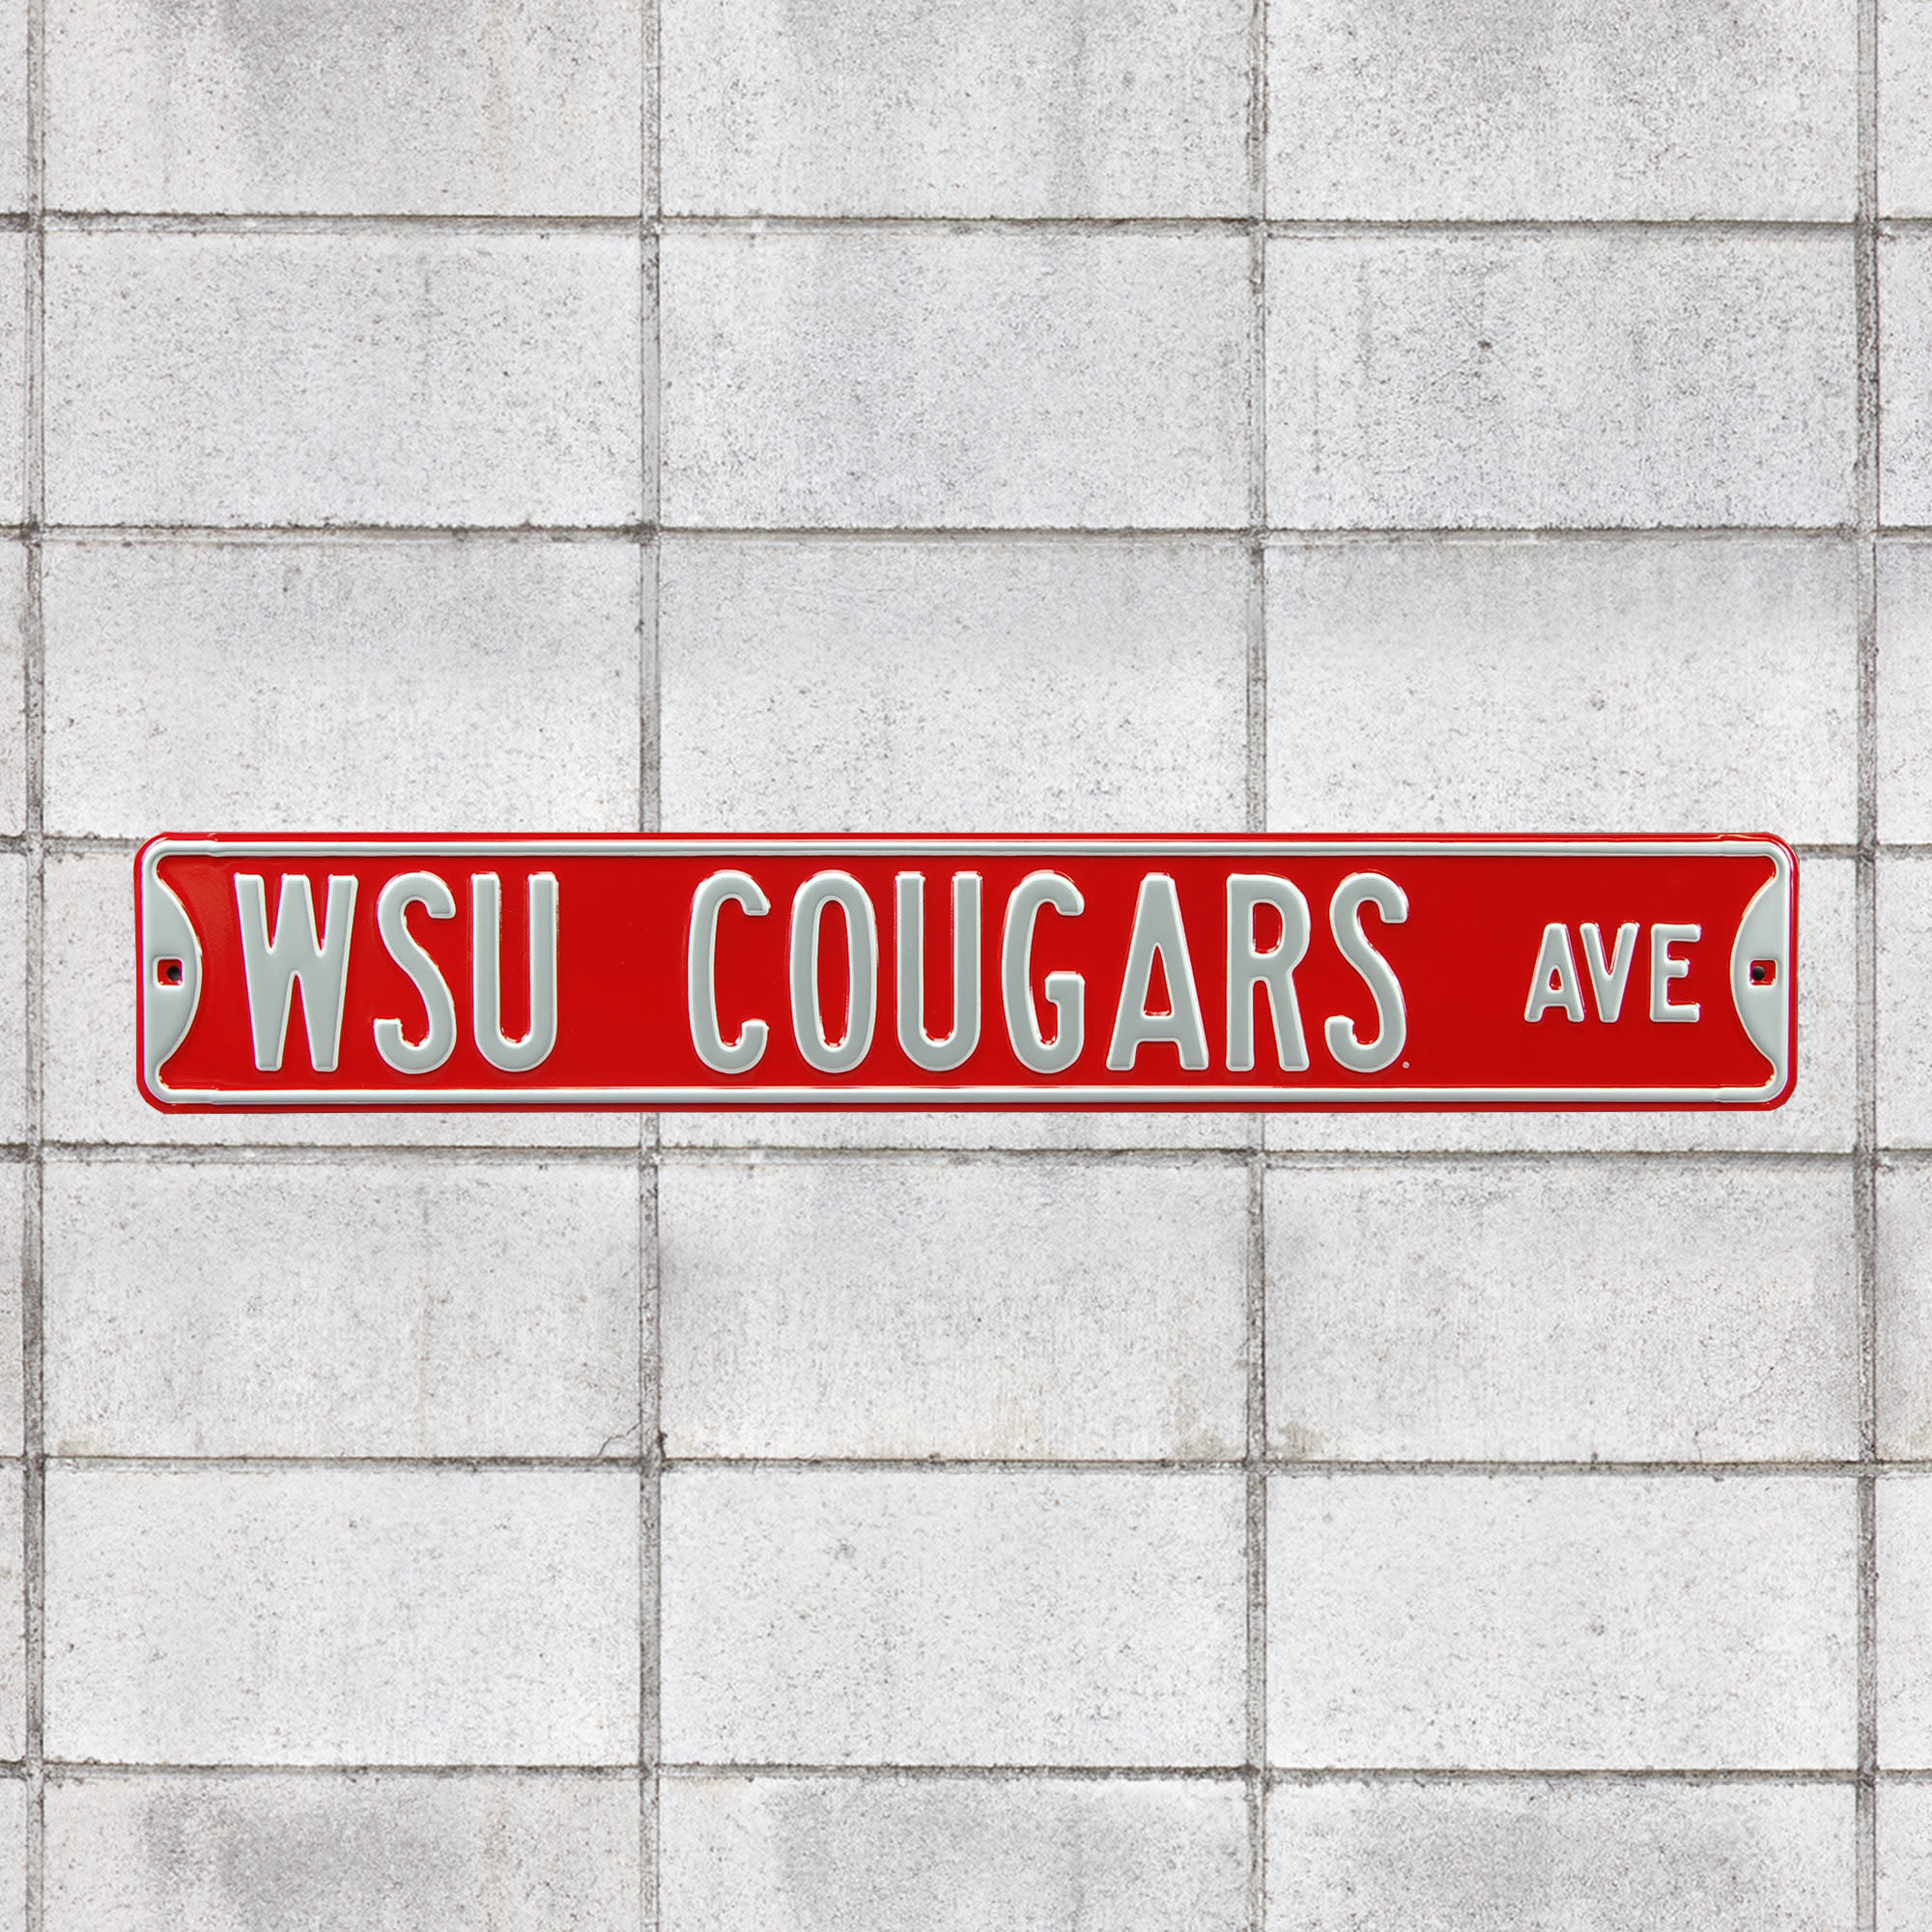 Washington State Cougars: Washington State Cougars Avenue - Officially Licensed Metal Street Sign 36.0"W x 6.0"H by Fathead | 10